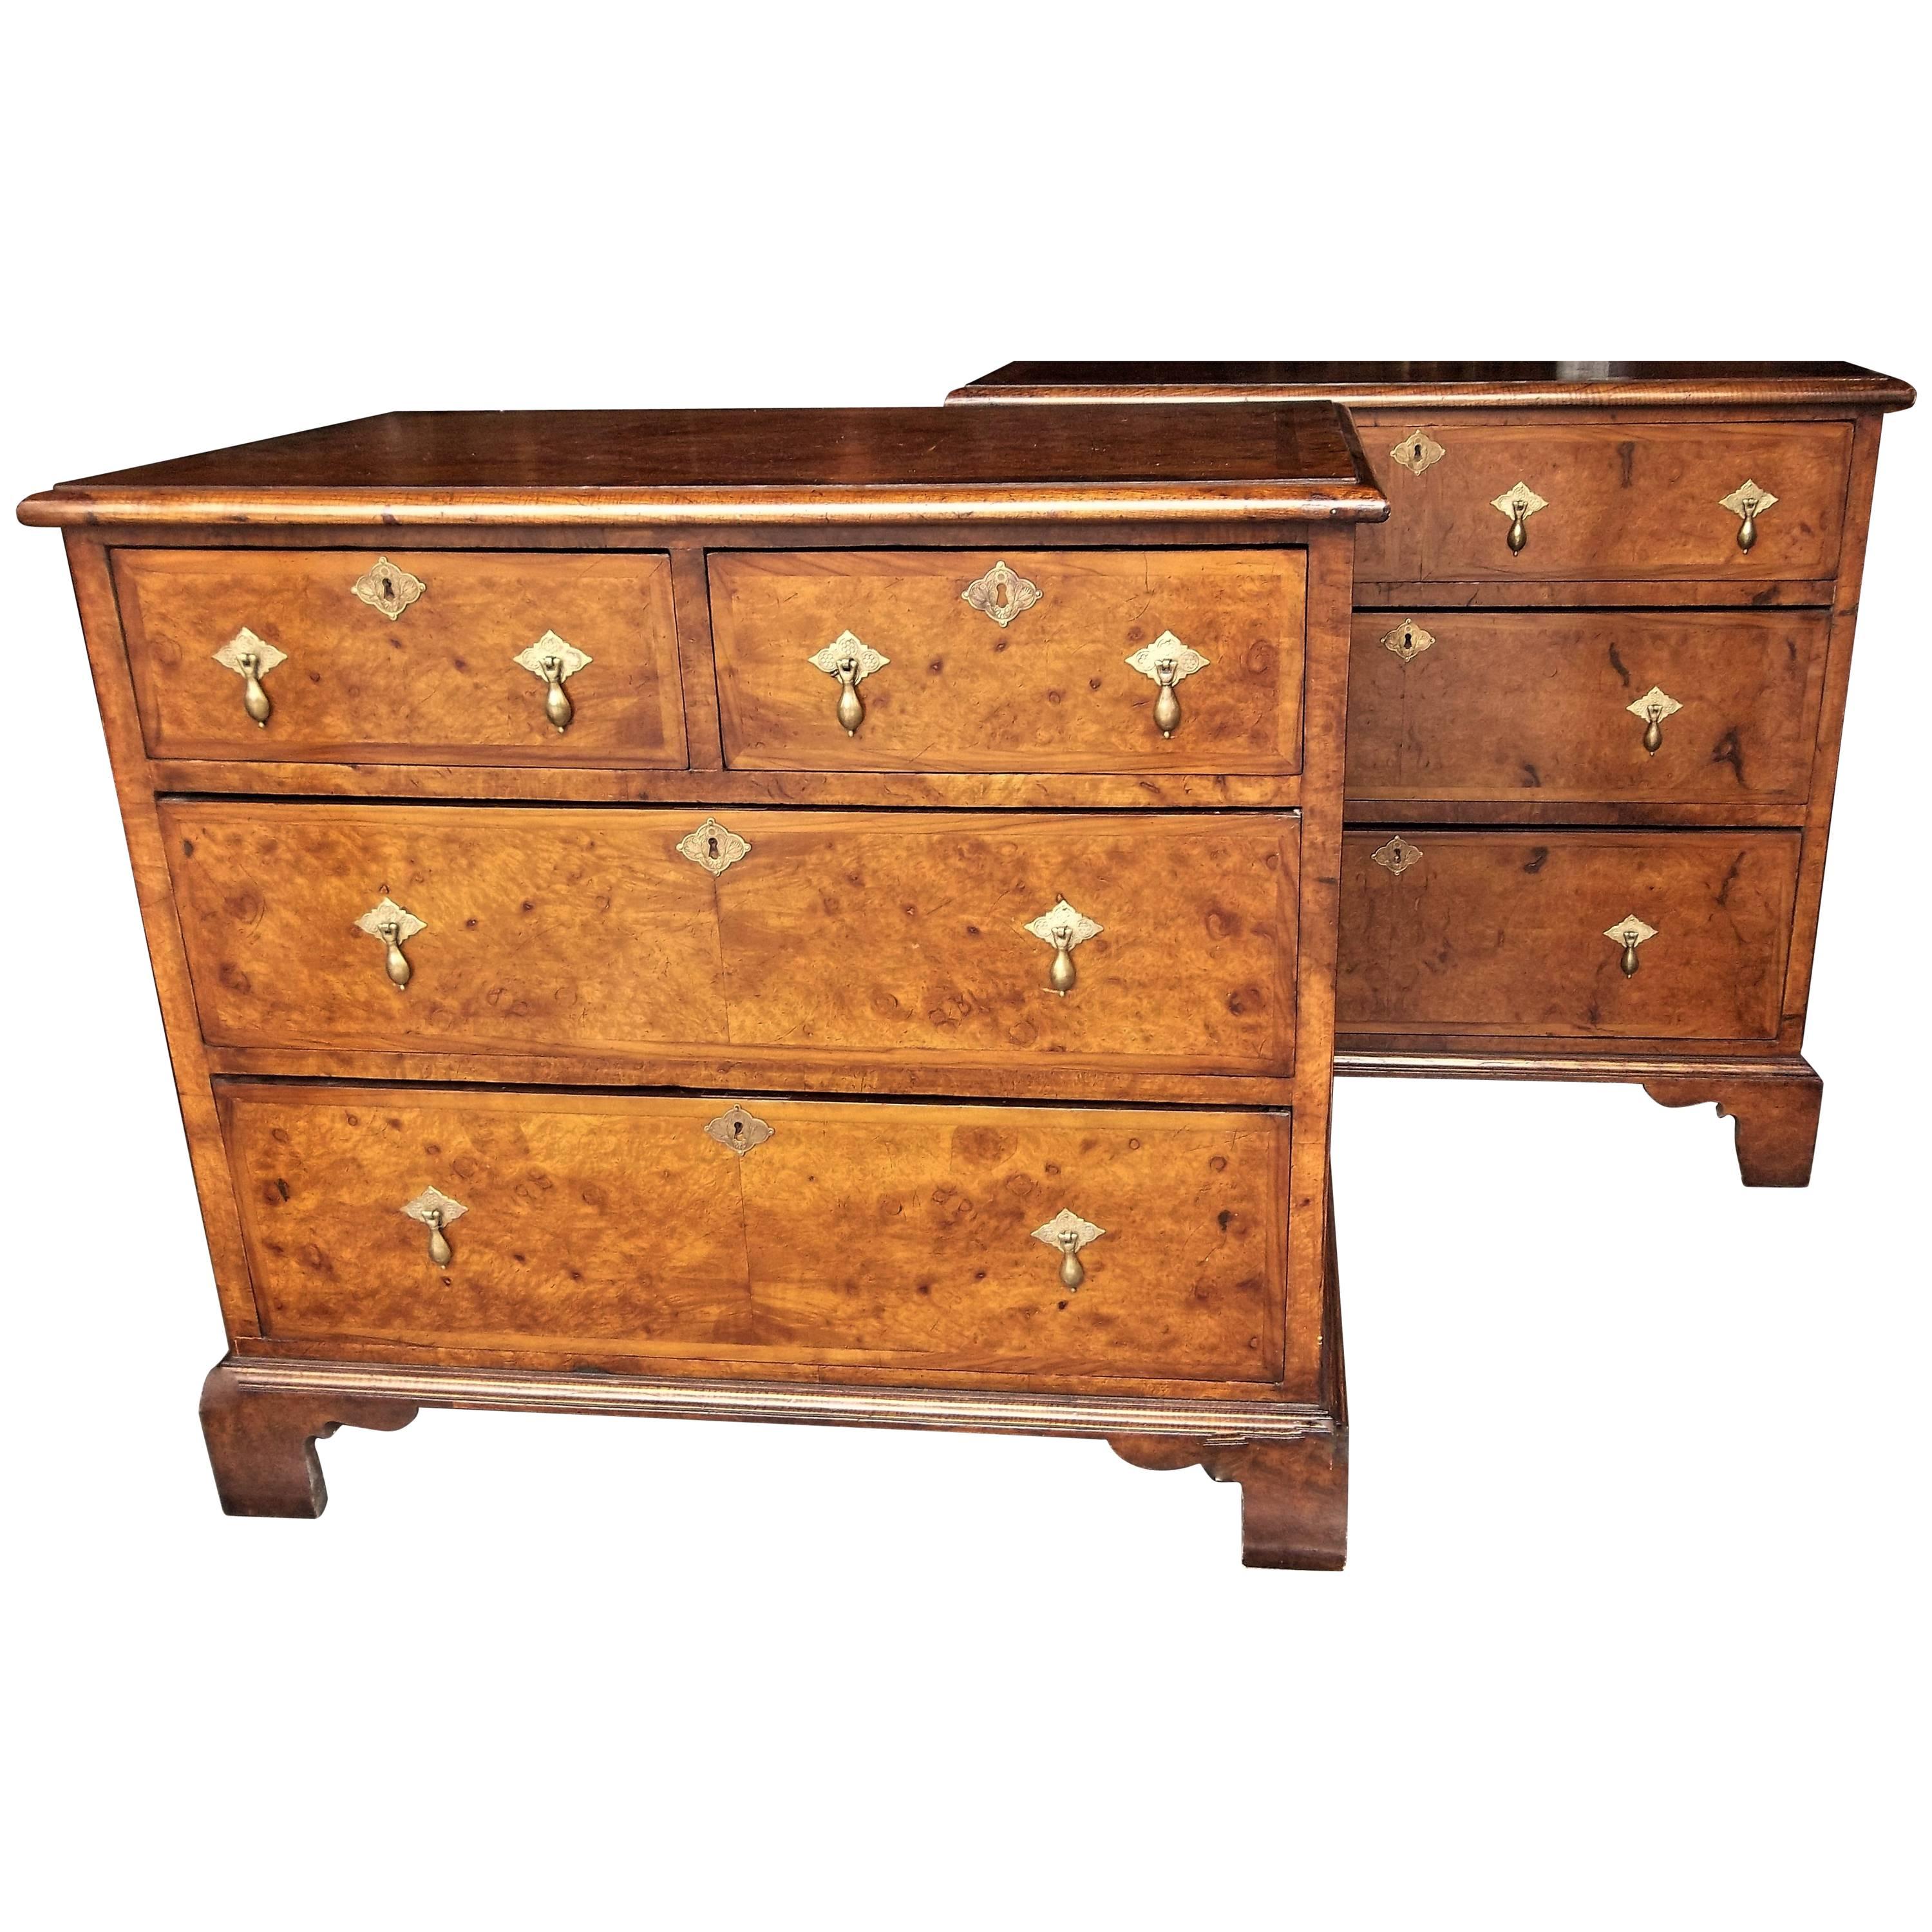 Near Pair of George III Style Highly Figured Walnut Chests of Drawers